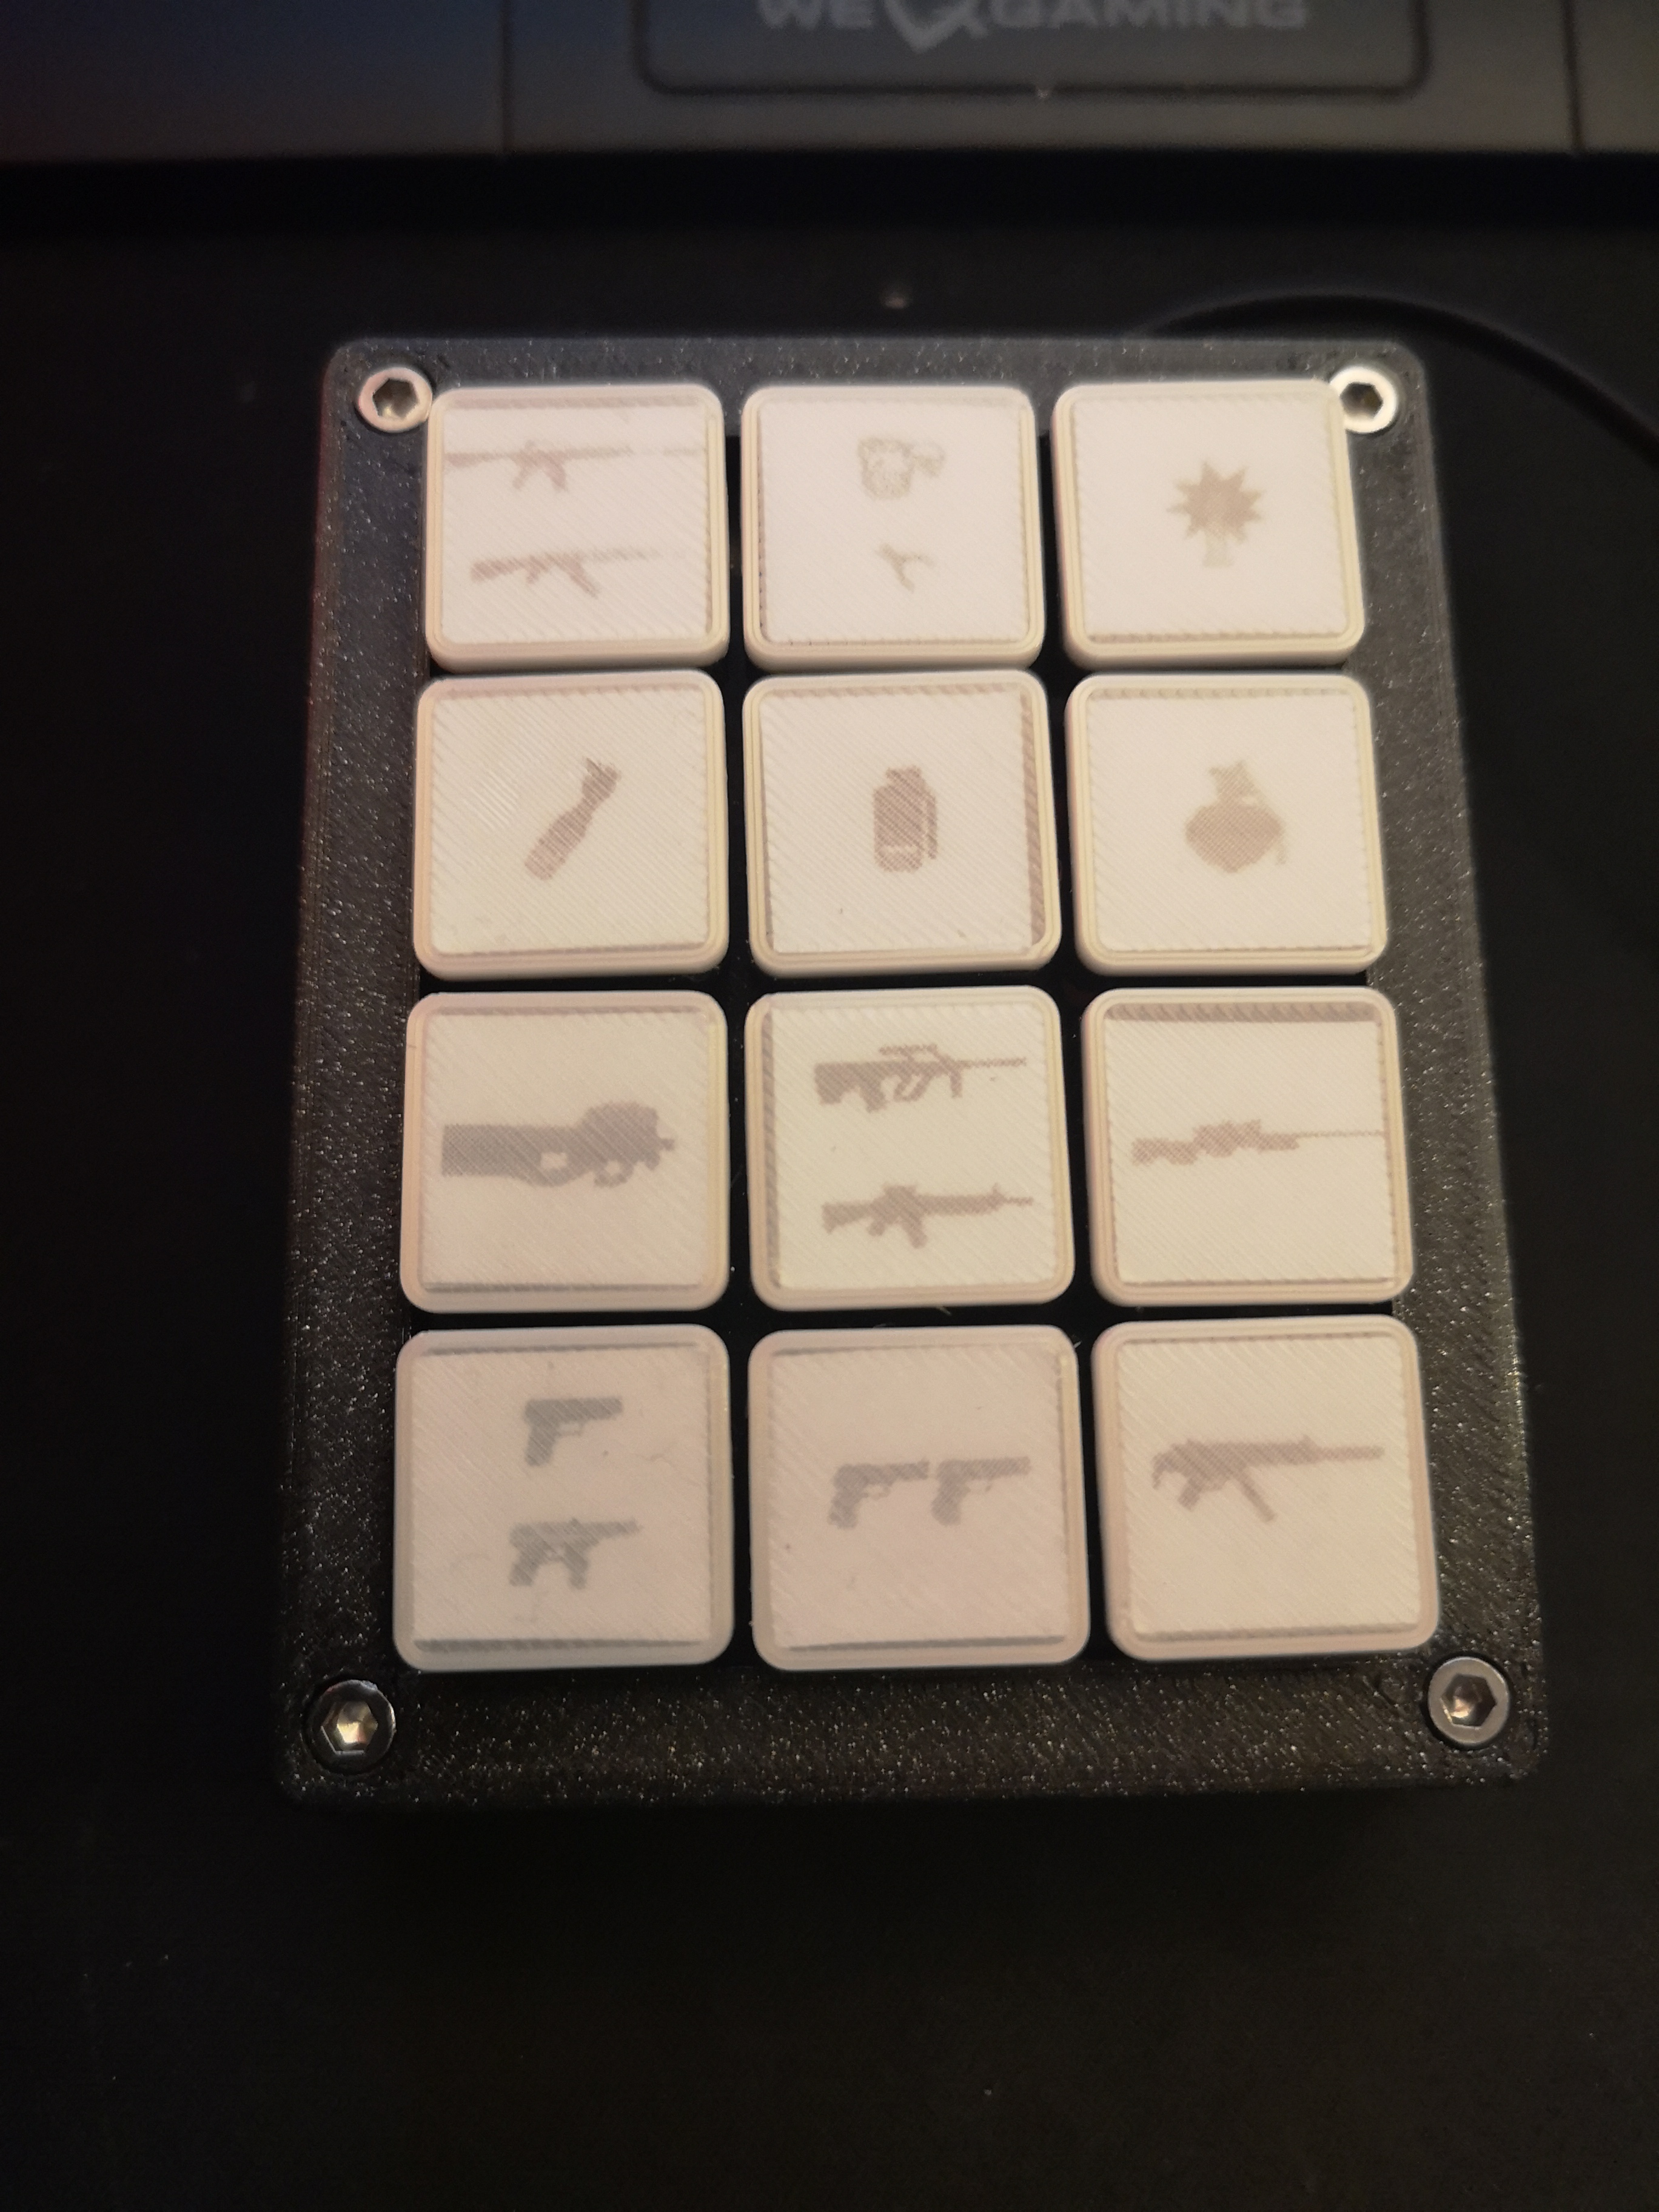 12 Button Macro Keyboard with printable Keycaps